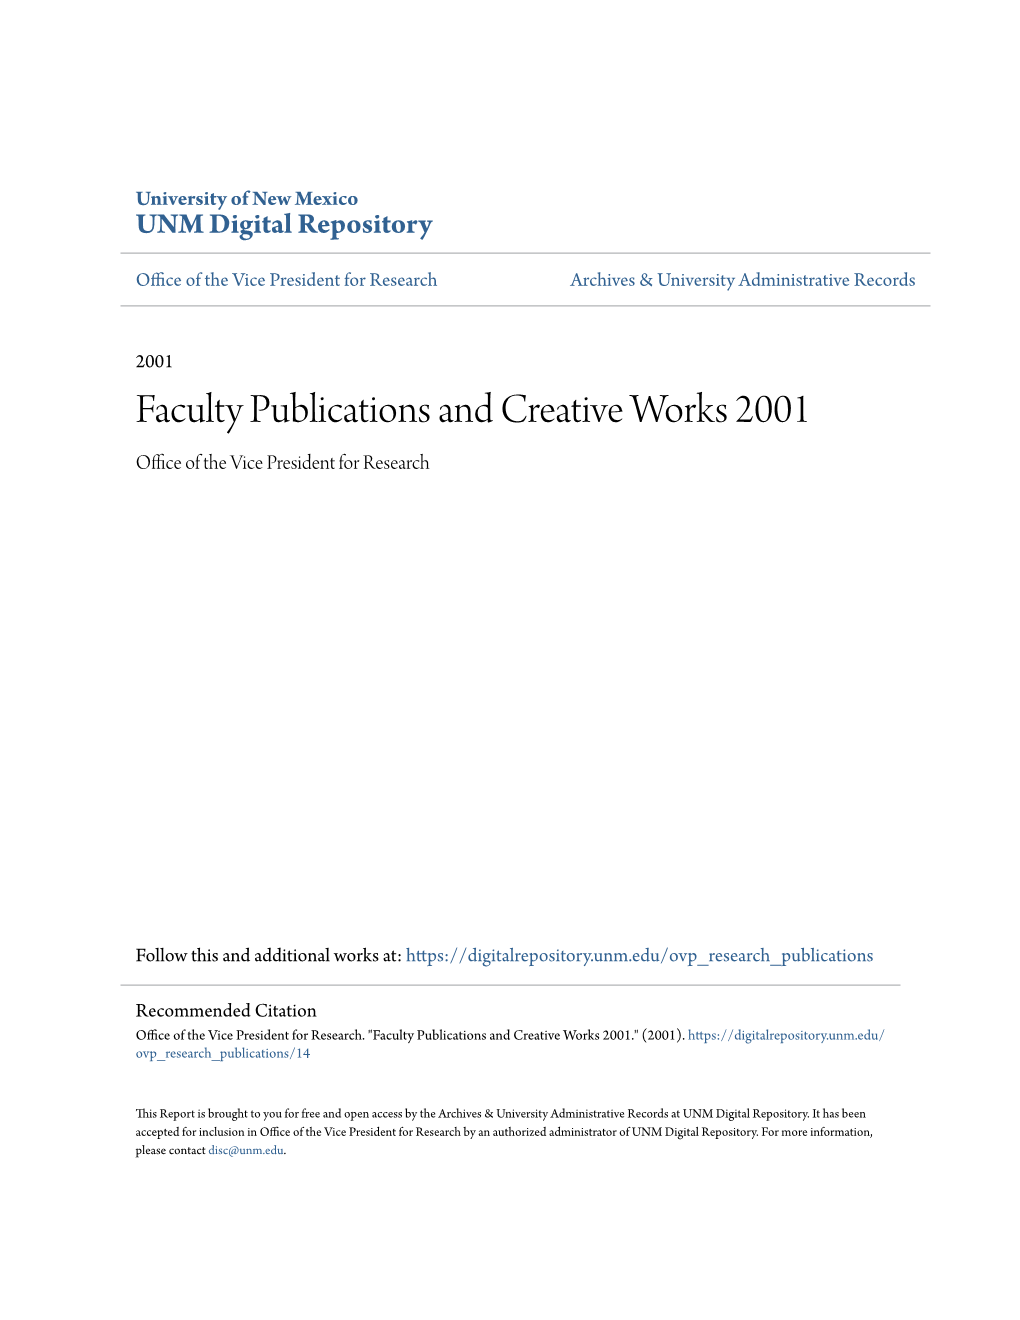 Faculty Publications and Creative Works 2001 Office of Theice V President for Research